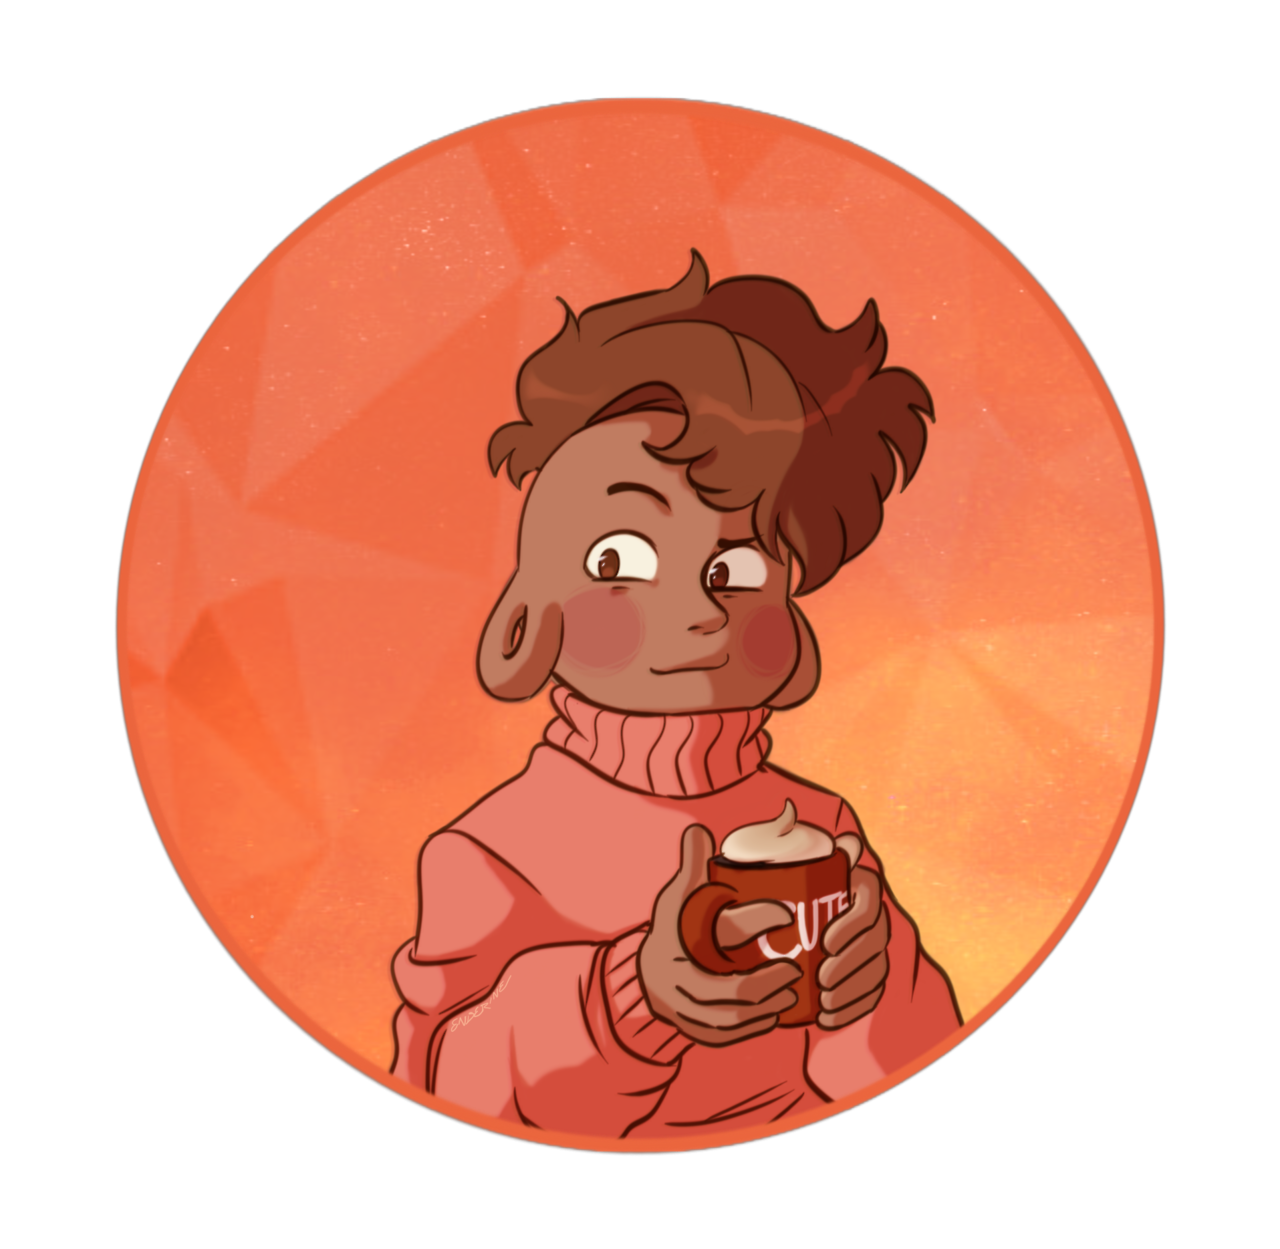 Autumn is the time for cute sweaters and pumpkin spice beverages